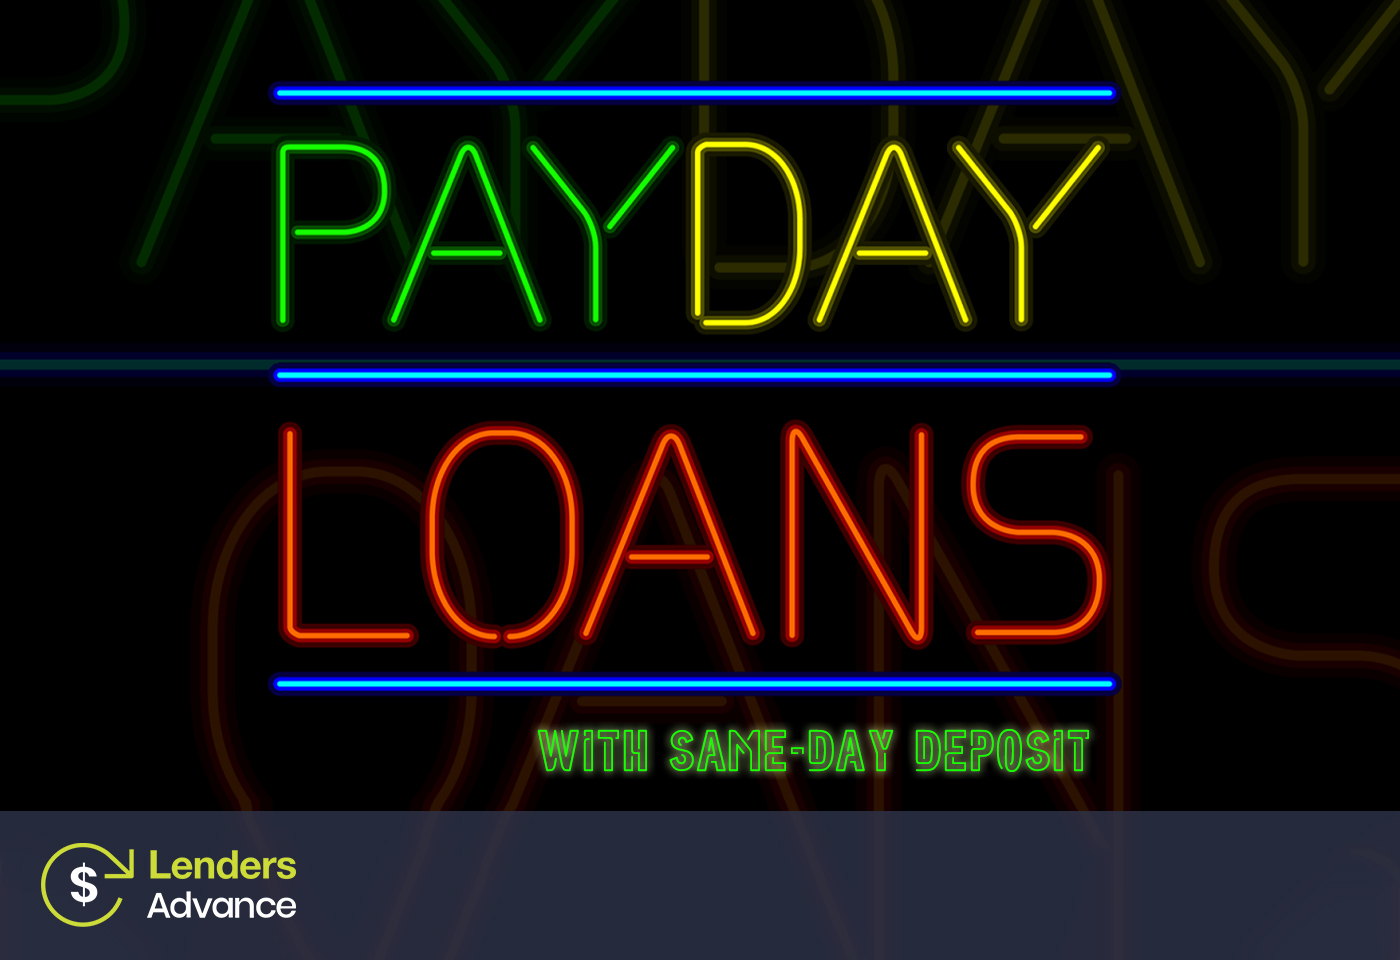 Payday Loans with Same-day Deposit